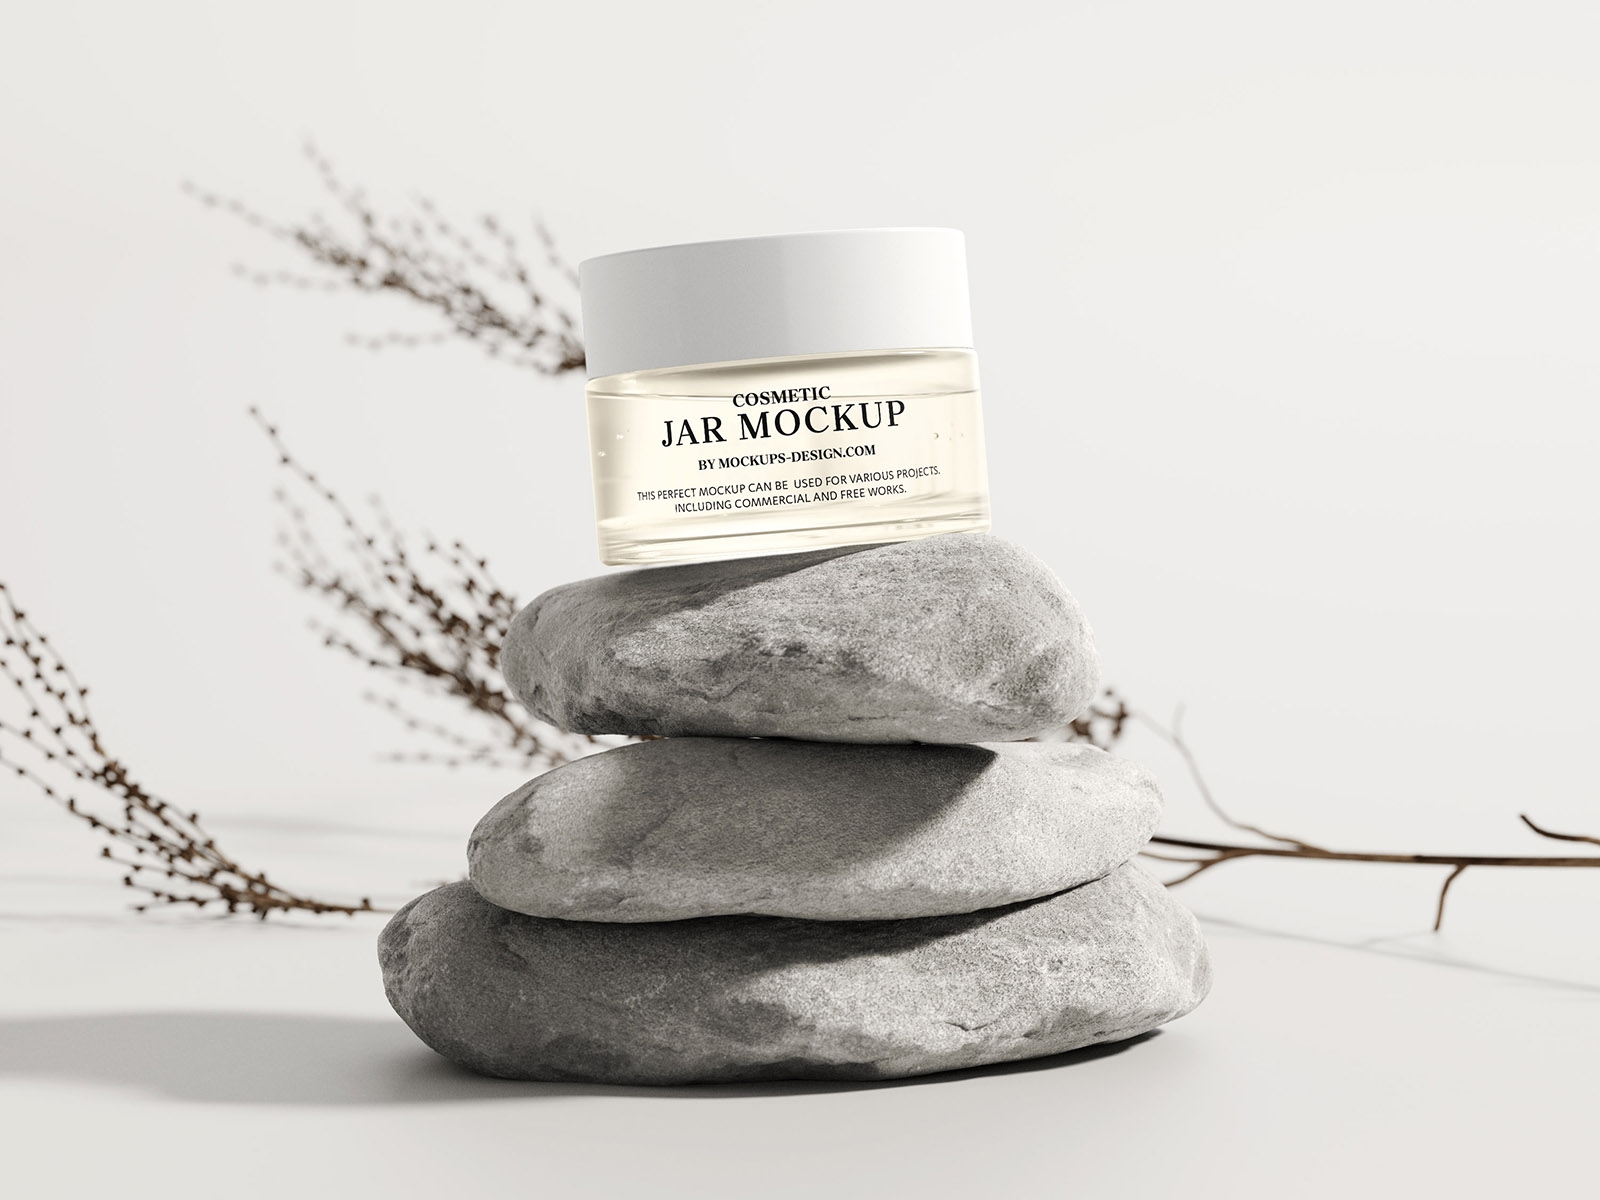 3 Cosmetic Jar Mockups Located on Stones FREE PSD